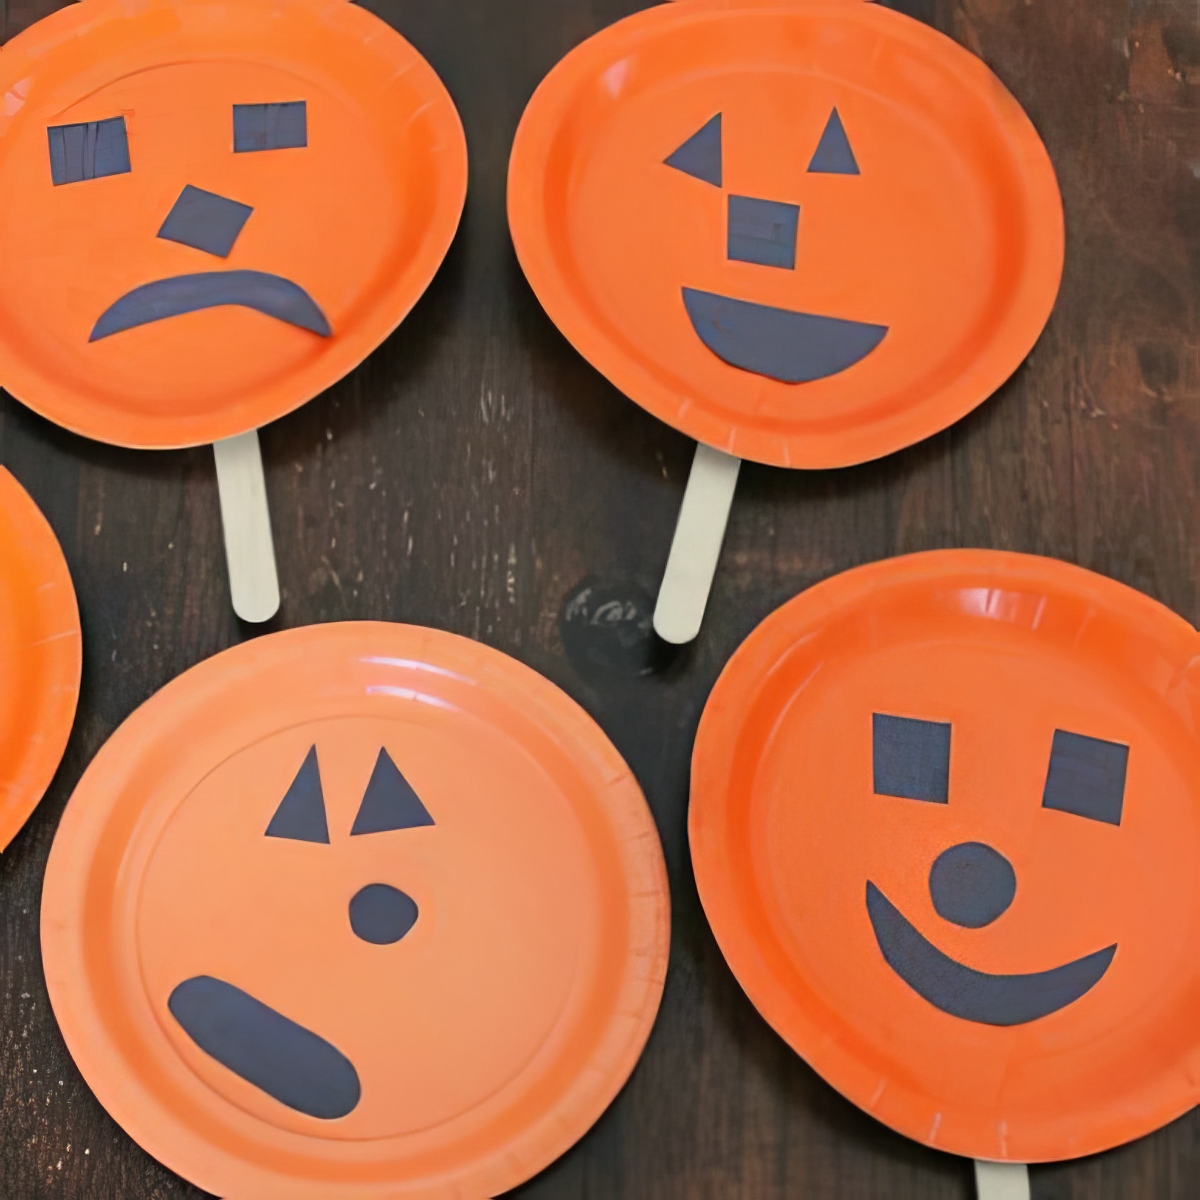 Pumpkin-Face-Finger-Play-and-Puppet, Fun Halloween Activities For 3-Year-Olds